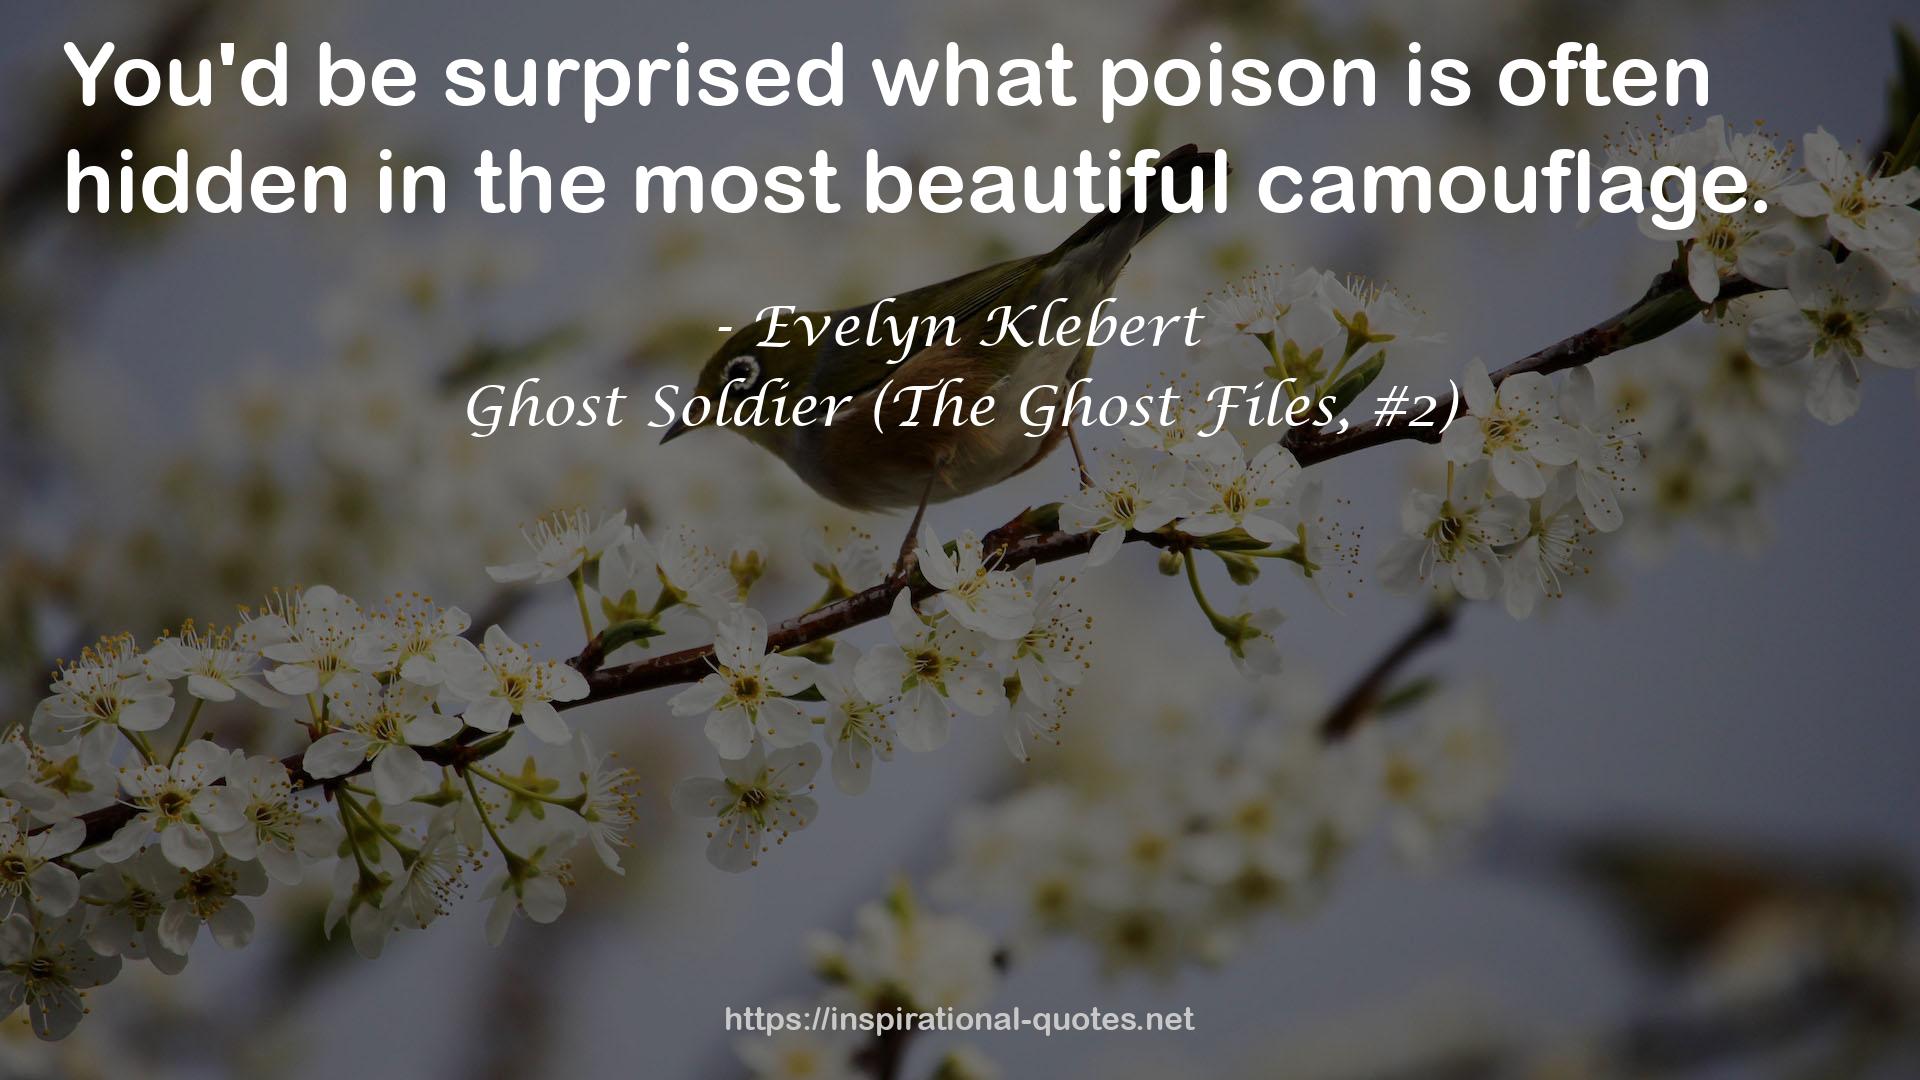 Ghost Soldier (The Ghost Files, #2) QUOTES